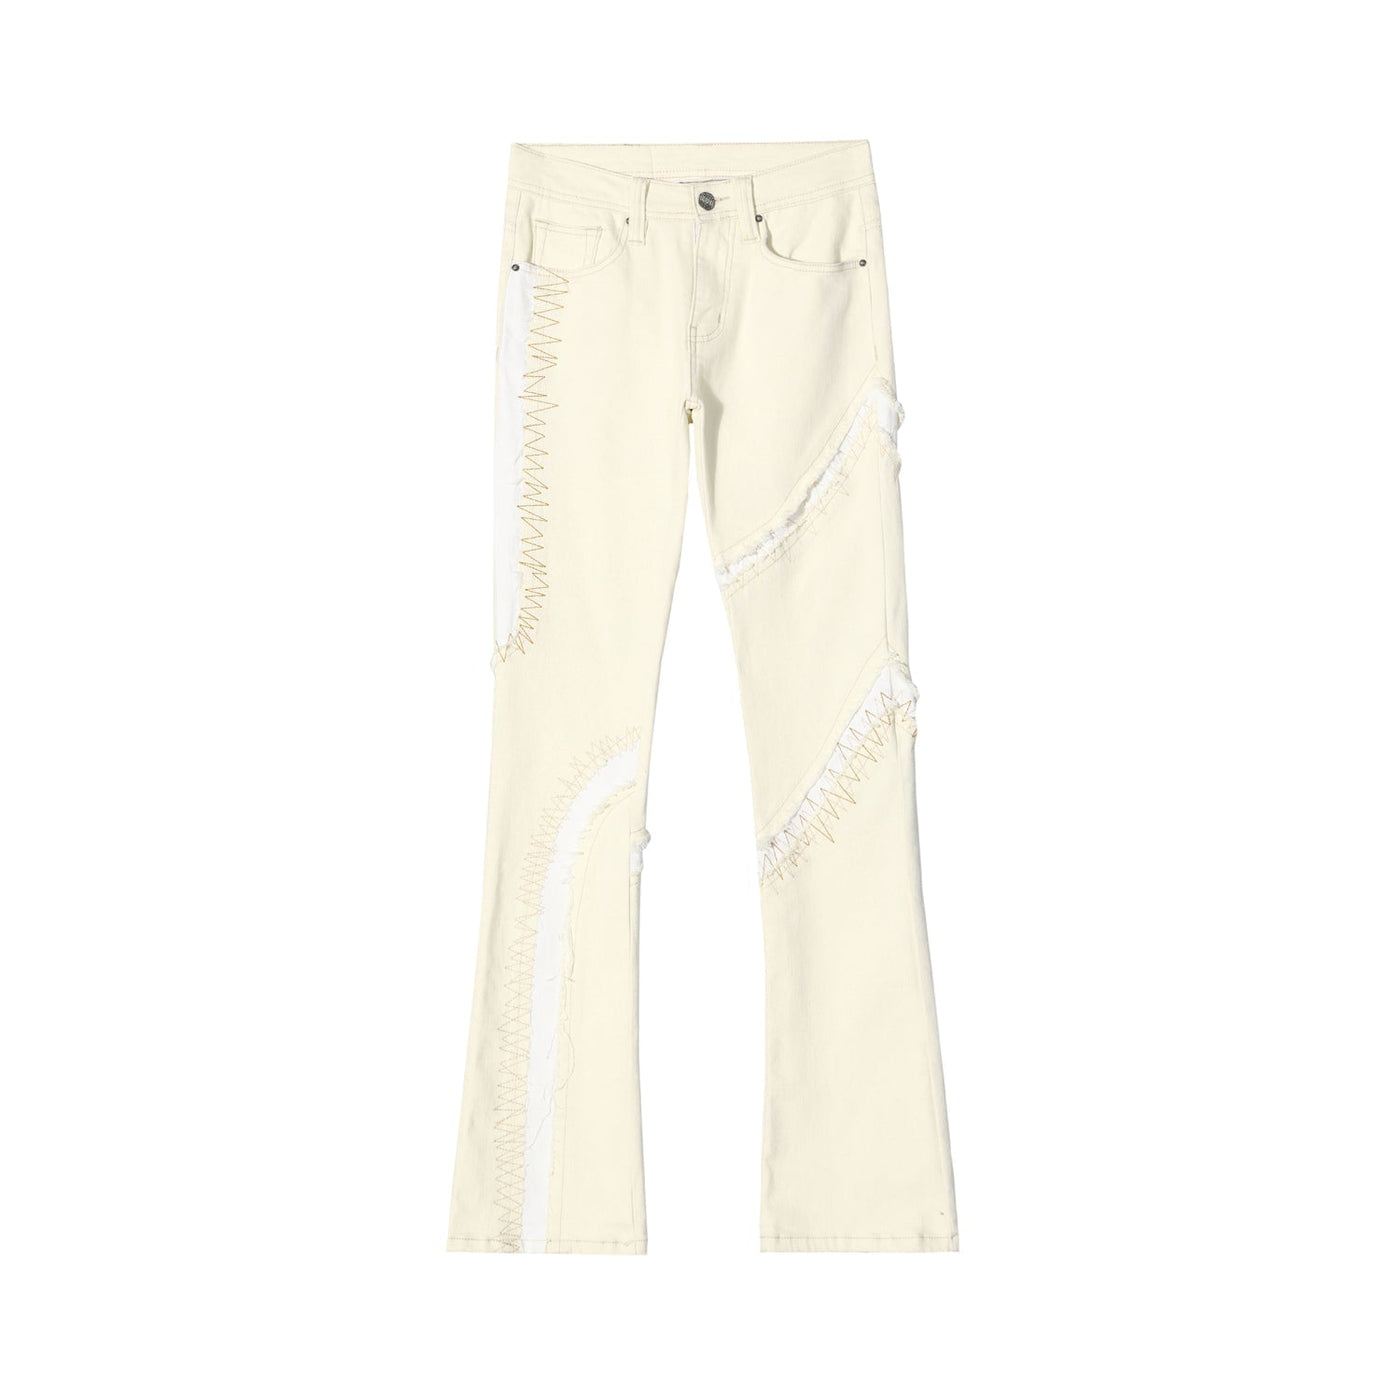 Classic Cut Baggy Jeans Korean Street Fashion Jeans By R69 Shop Online at OH Vault